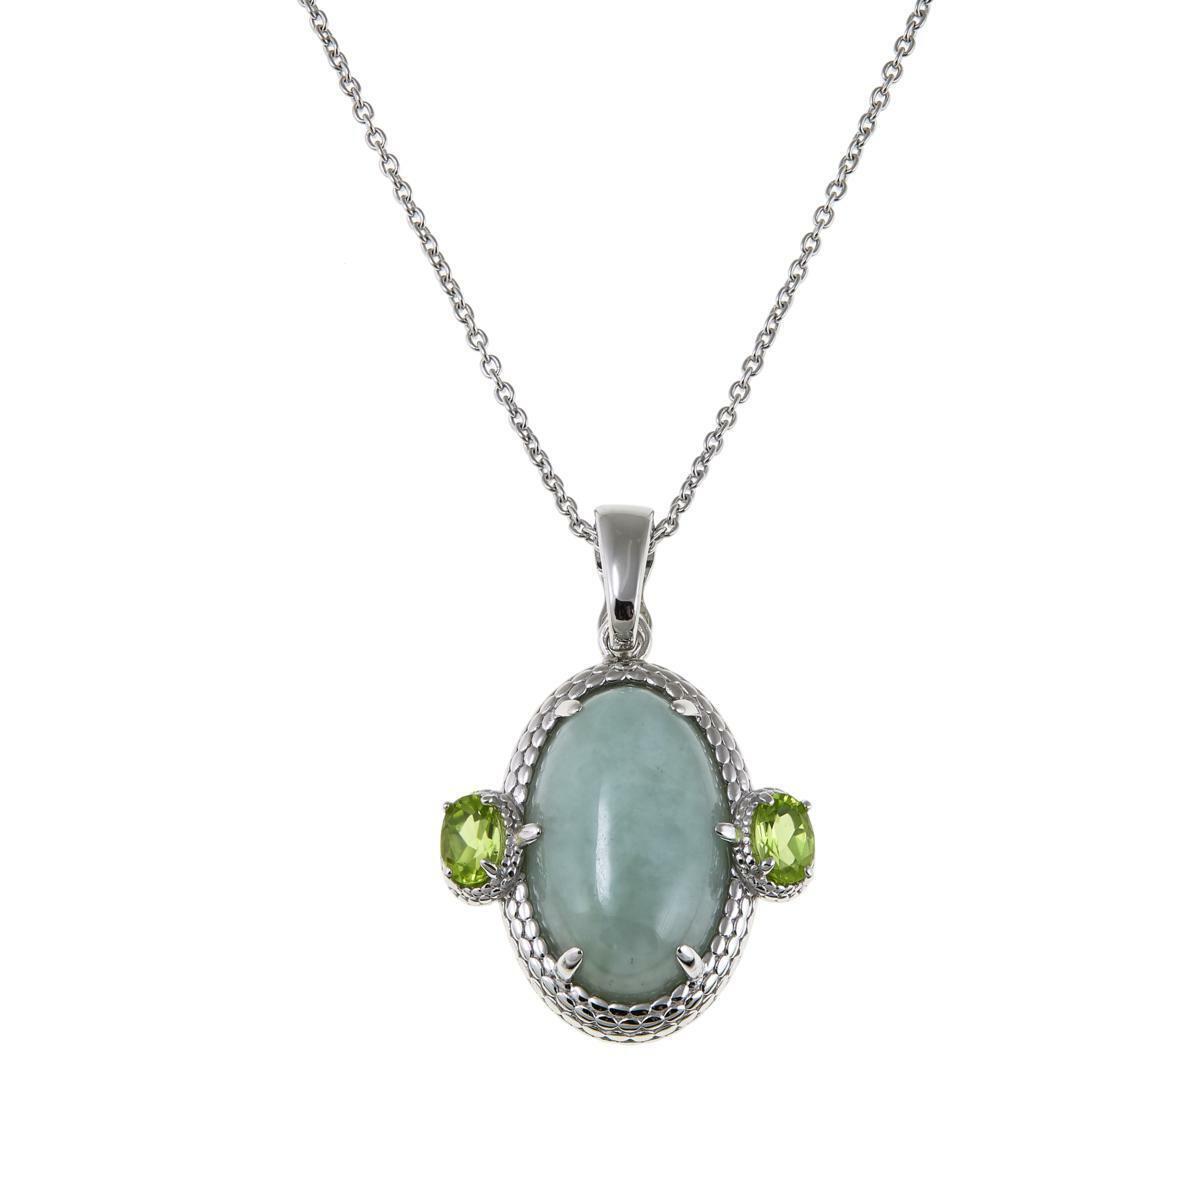 Jade of Yesteryear Green Jade and Peridot Pendant with 18" Chain